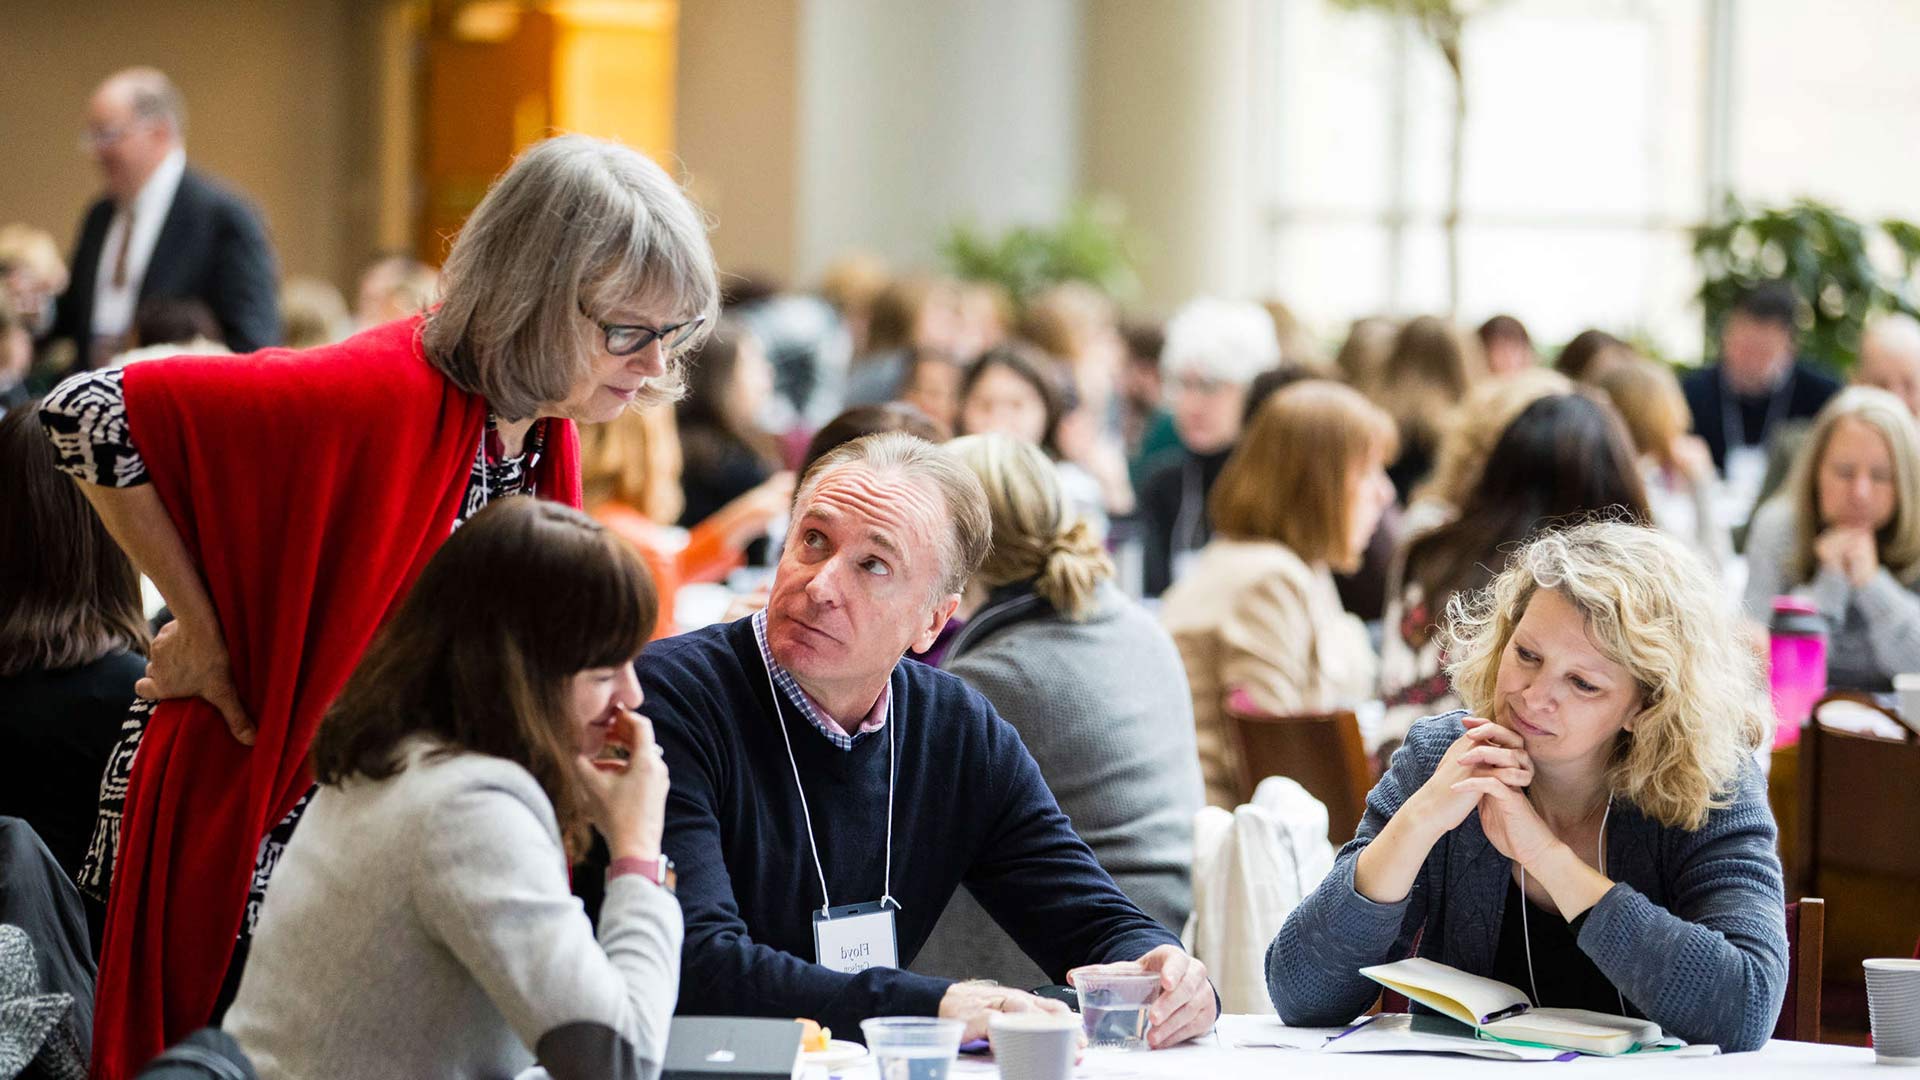 Attendees work on a group exercise during the Executive Coaching in Organizations Conference in the Schulze Grand Atrium in the School of Law building in Minneapolis on January 19, 2018. 